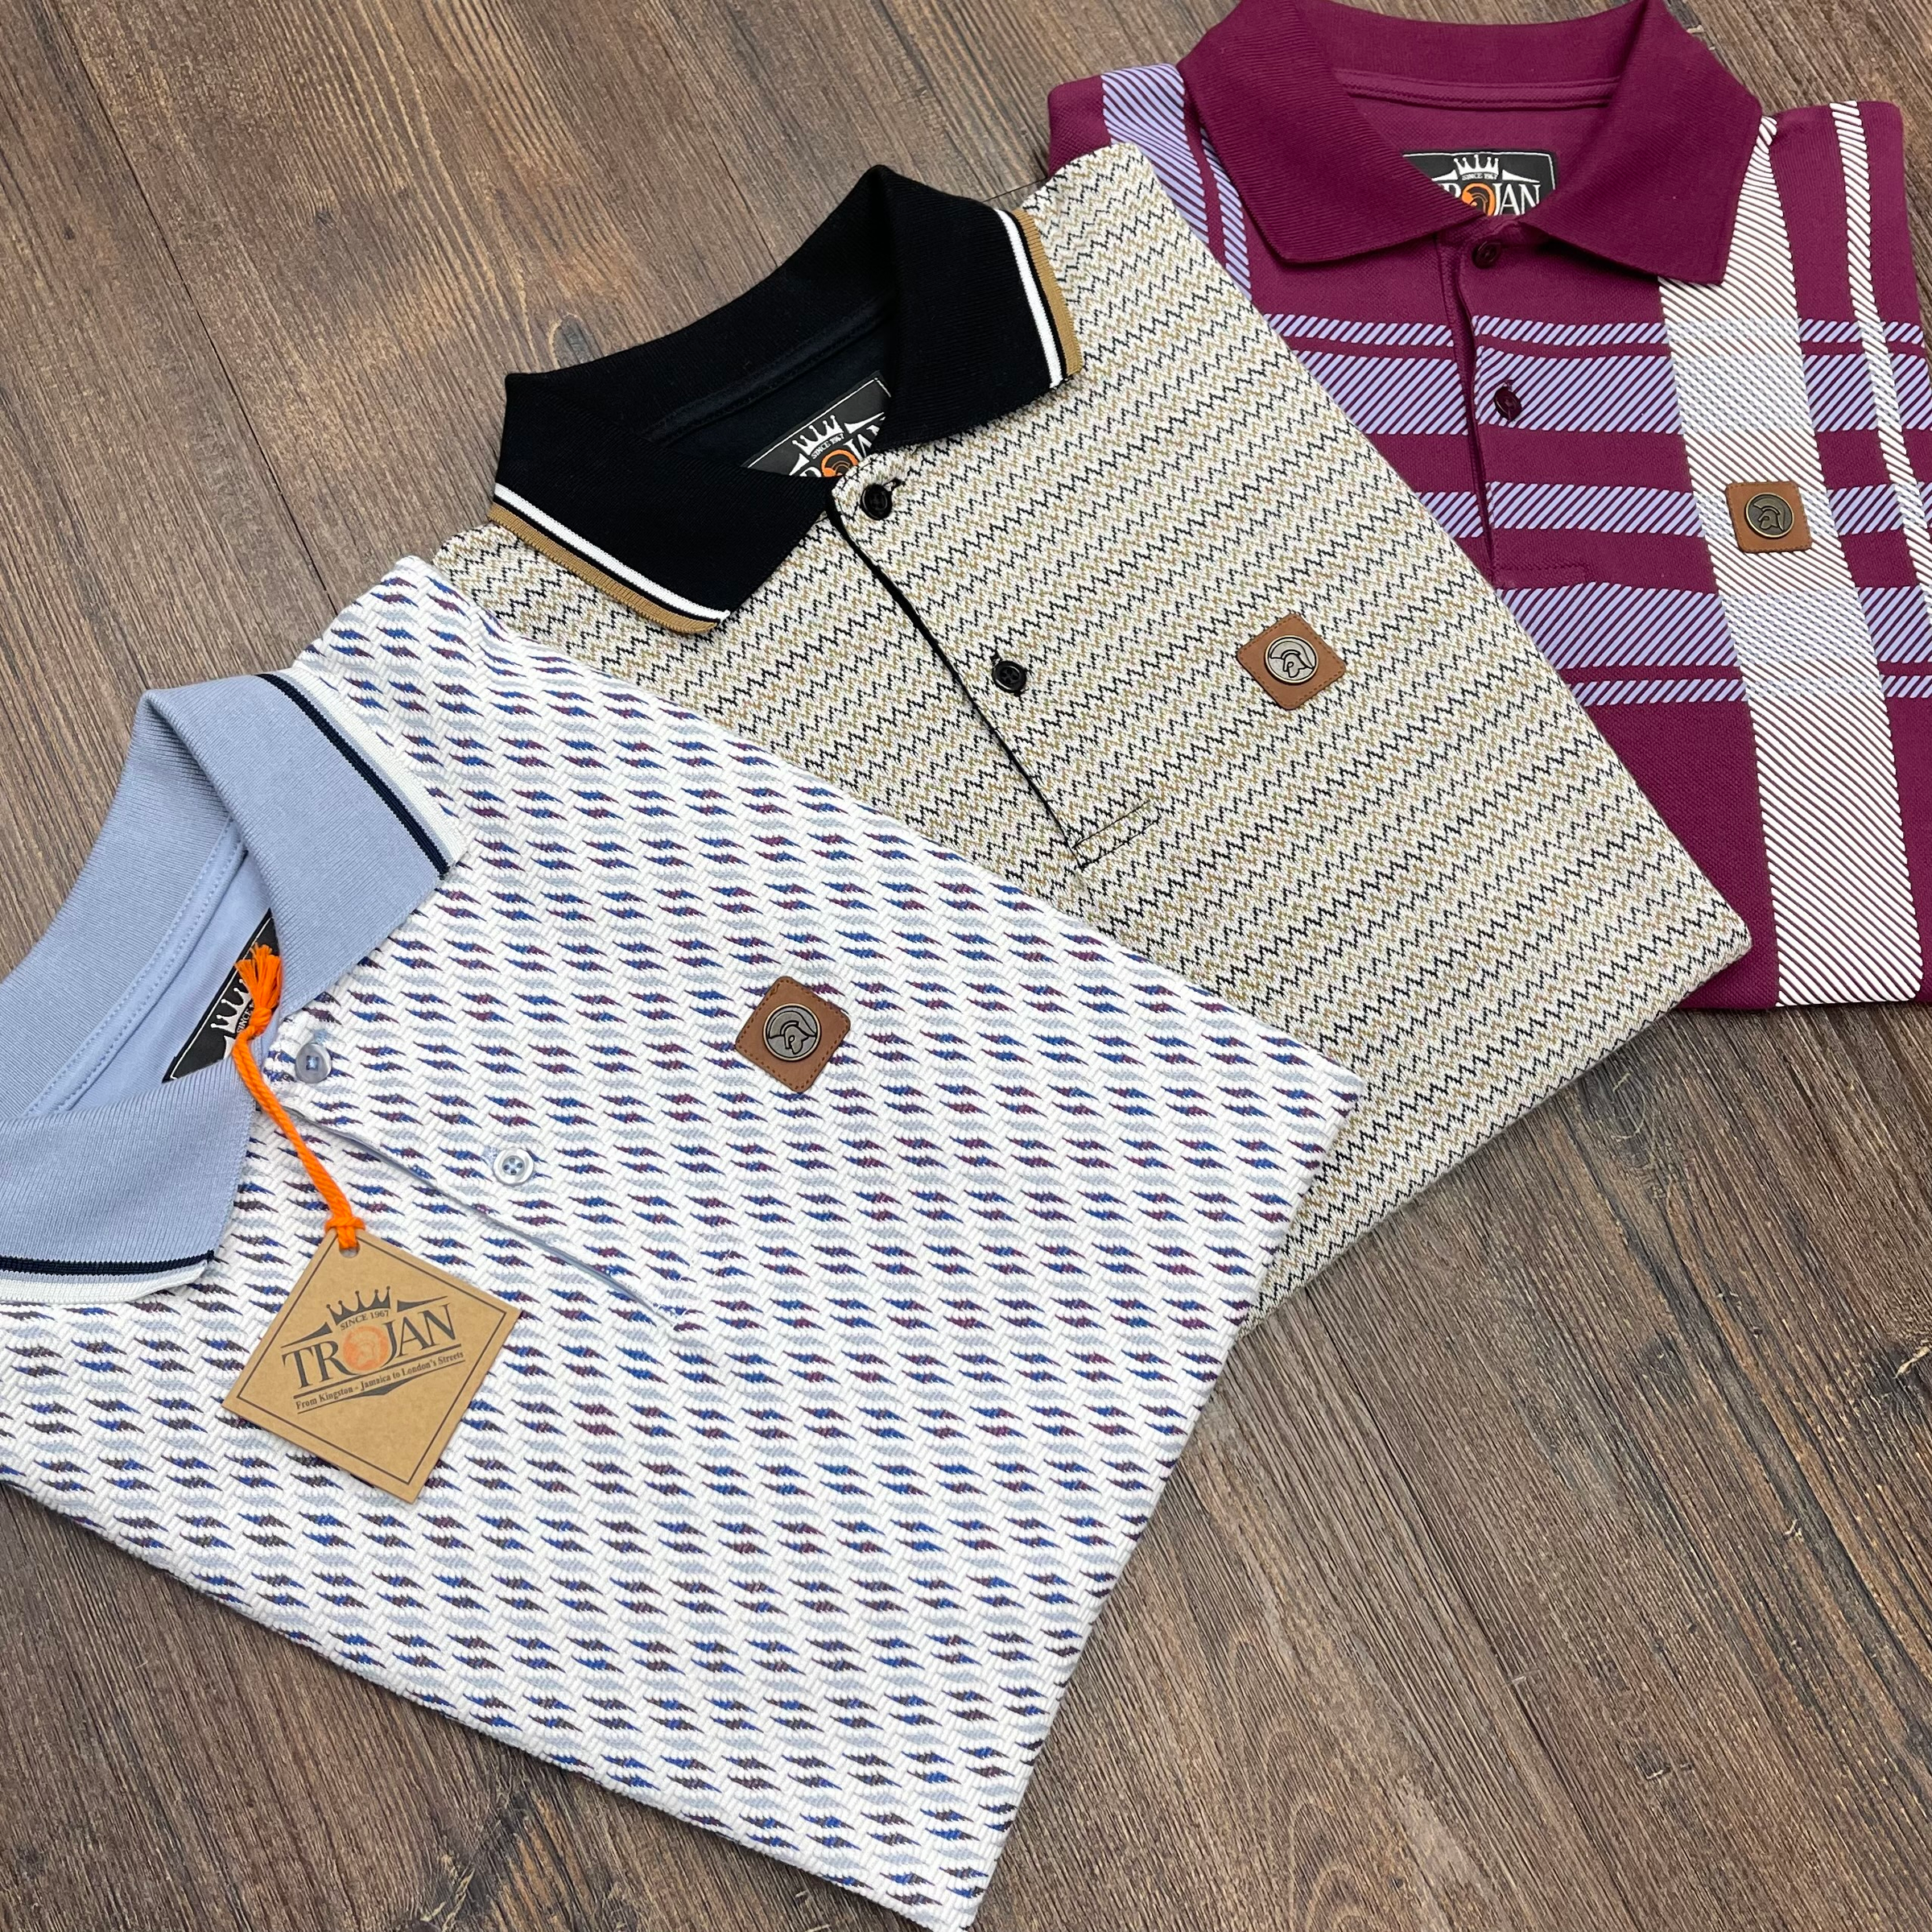 Men's 70s, 80s and Mod Polo Shirts at Urban Menswear